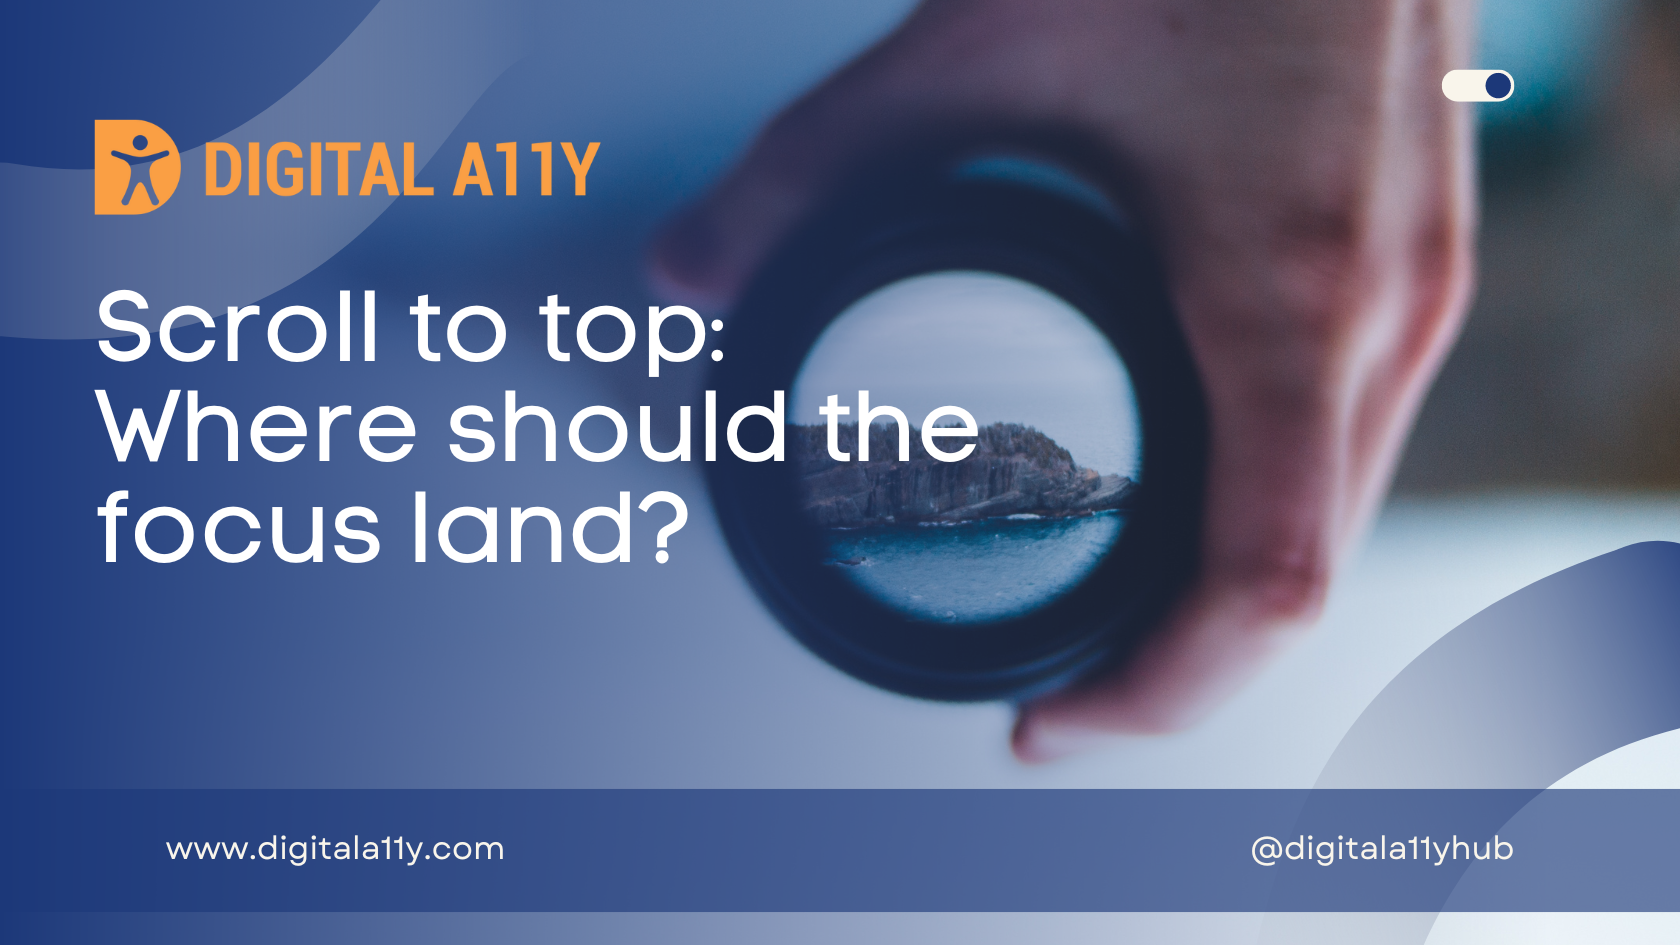 Scroll to top: Where should the focus land?